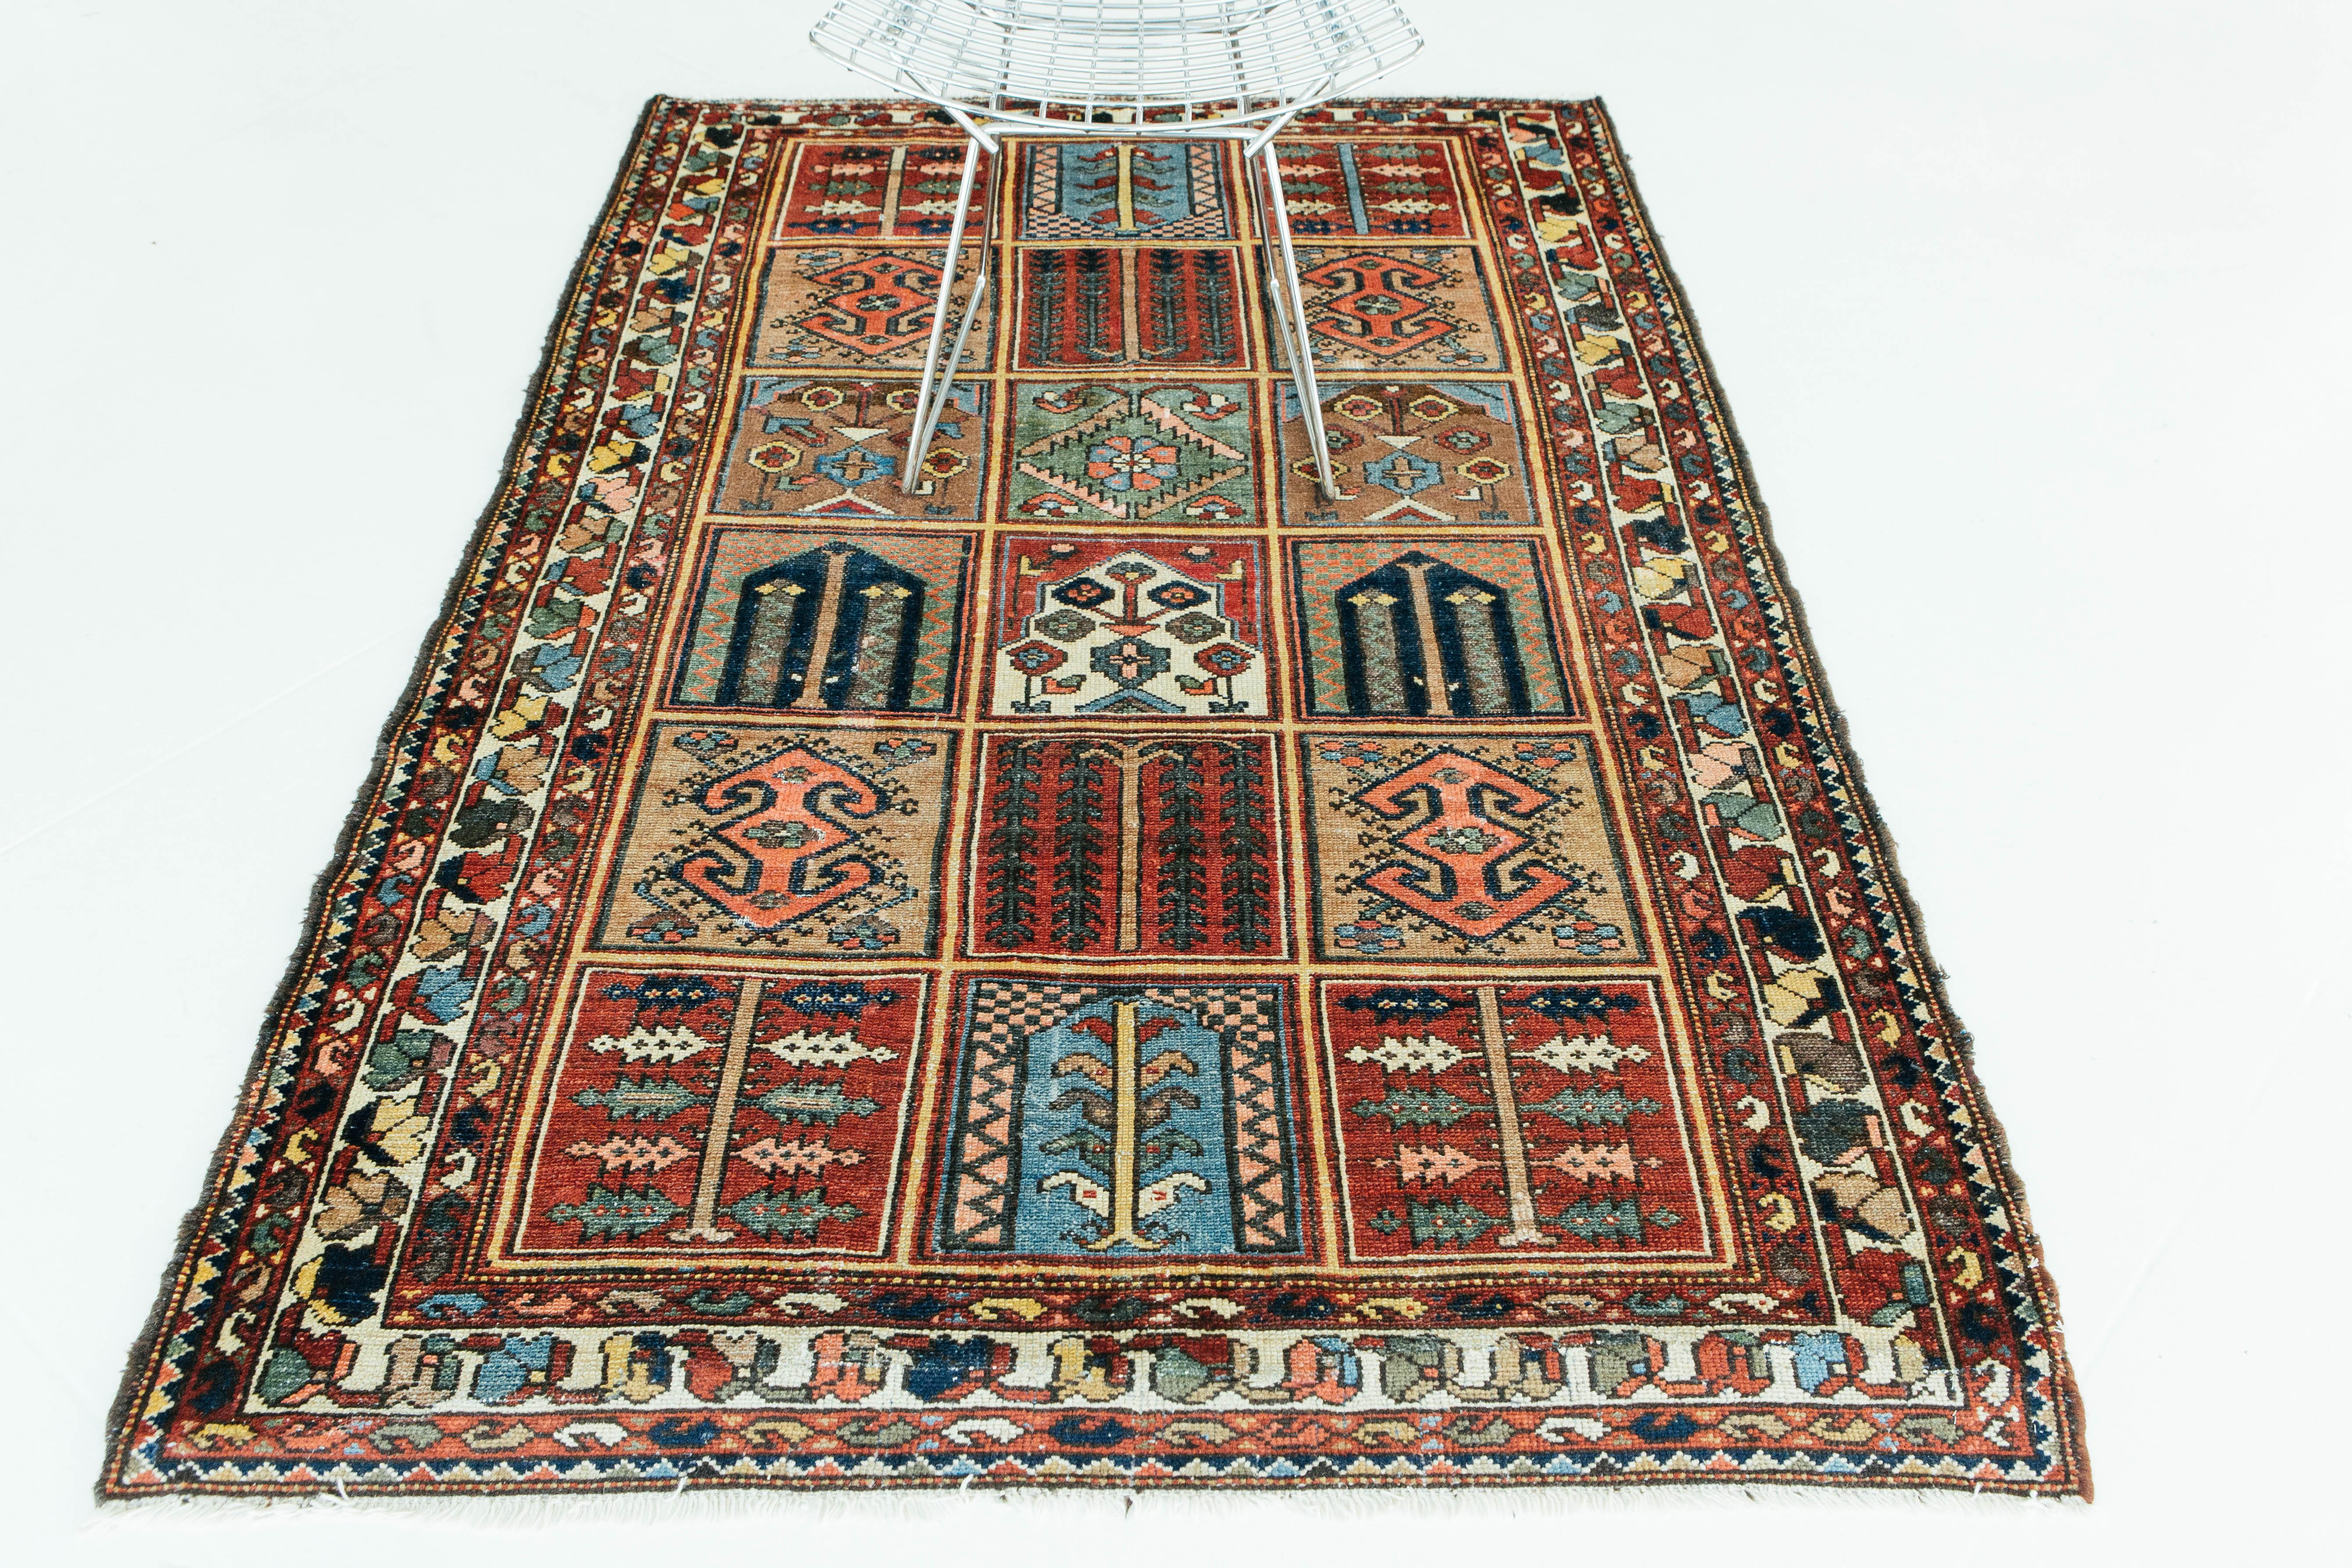 An antique Bakhtiari Garden Design rug woven in the Zagros Mountains of Iran. This garden design rug uses vibrant colors to create square compartments filled with floral motives, such as a willow tree, a grapevine, or a vase. This piece is both